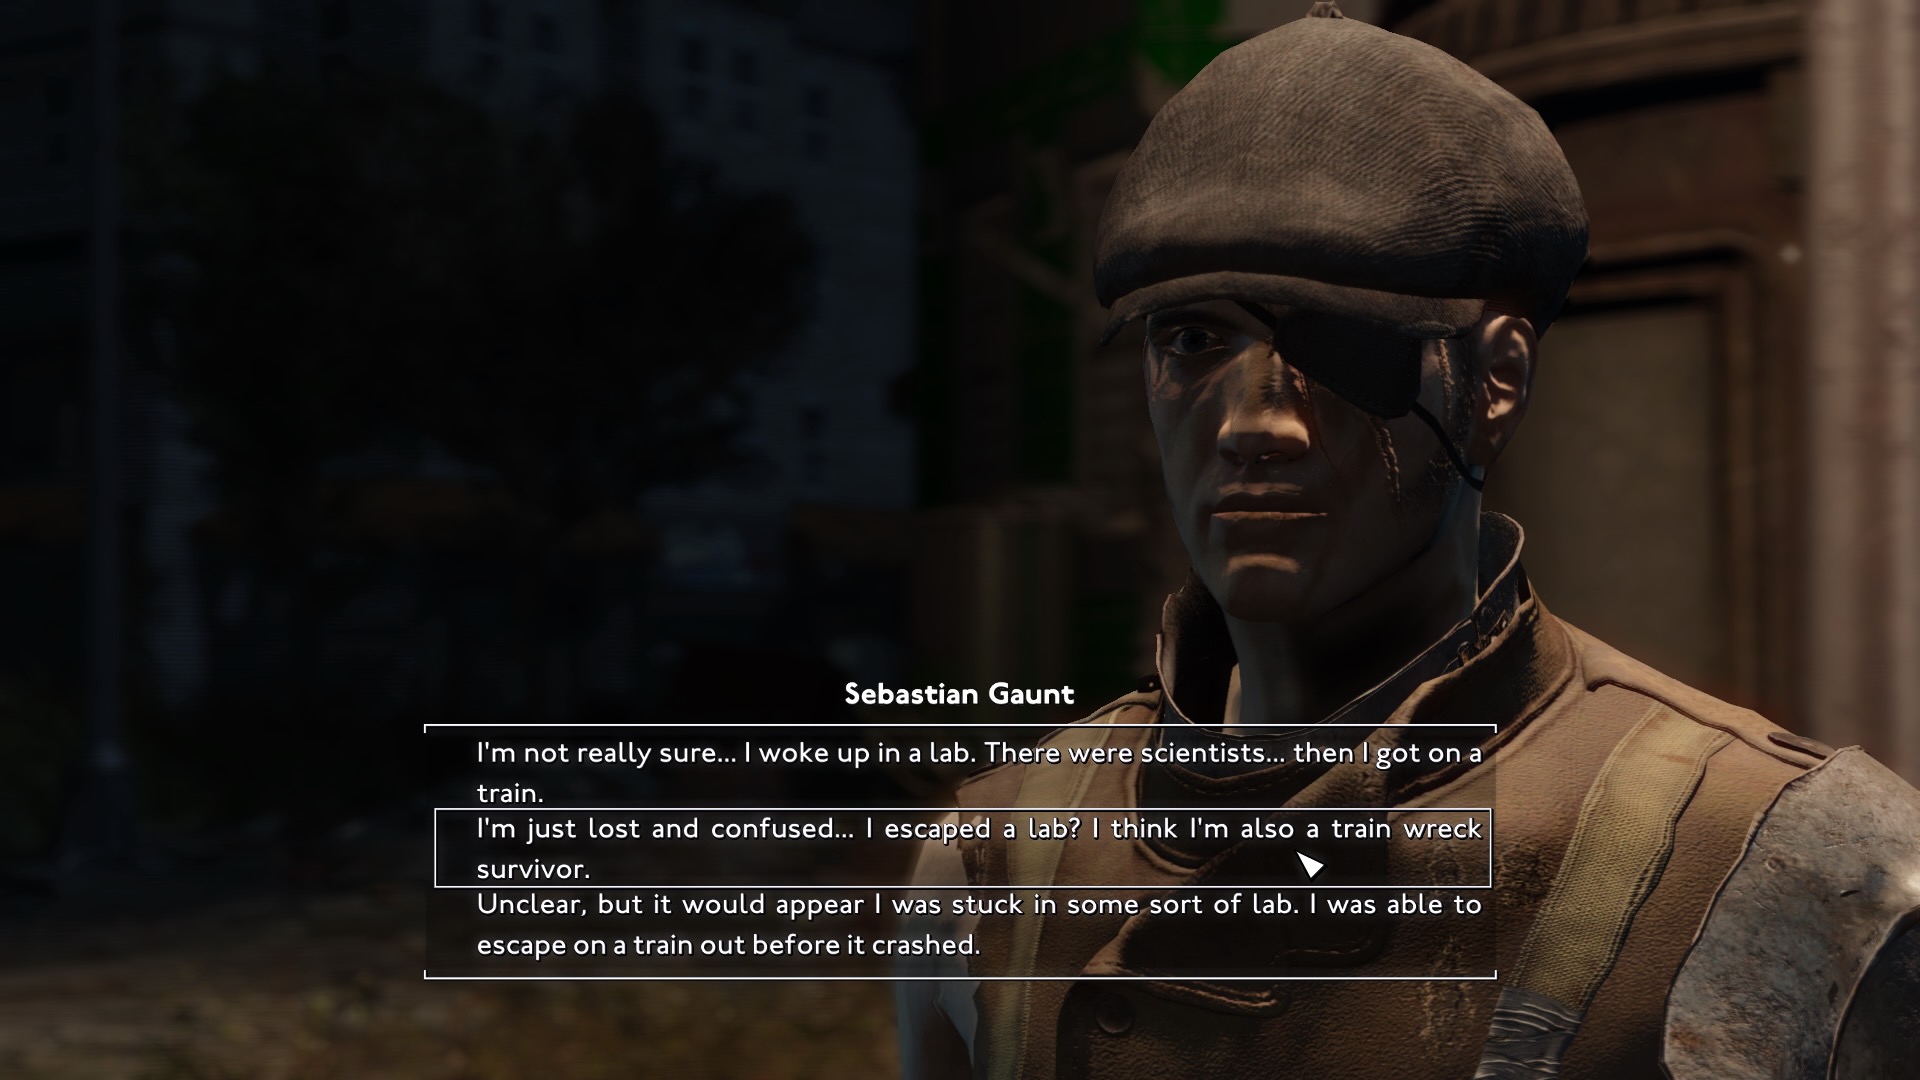 Chatting with Vagabonds leader Sebastian Gaunt and telling him about your train crash in Fallout: London.